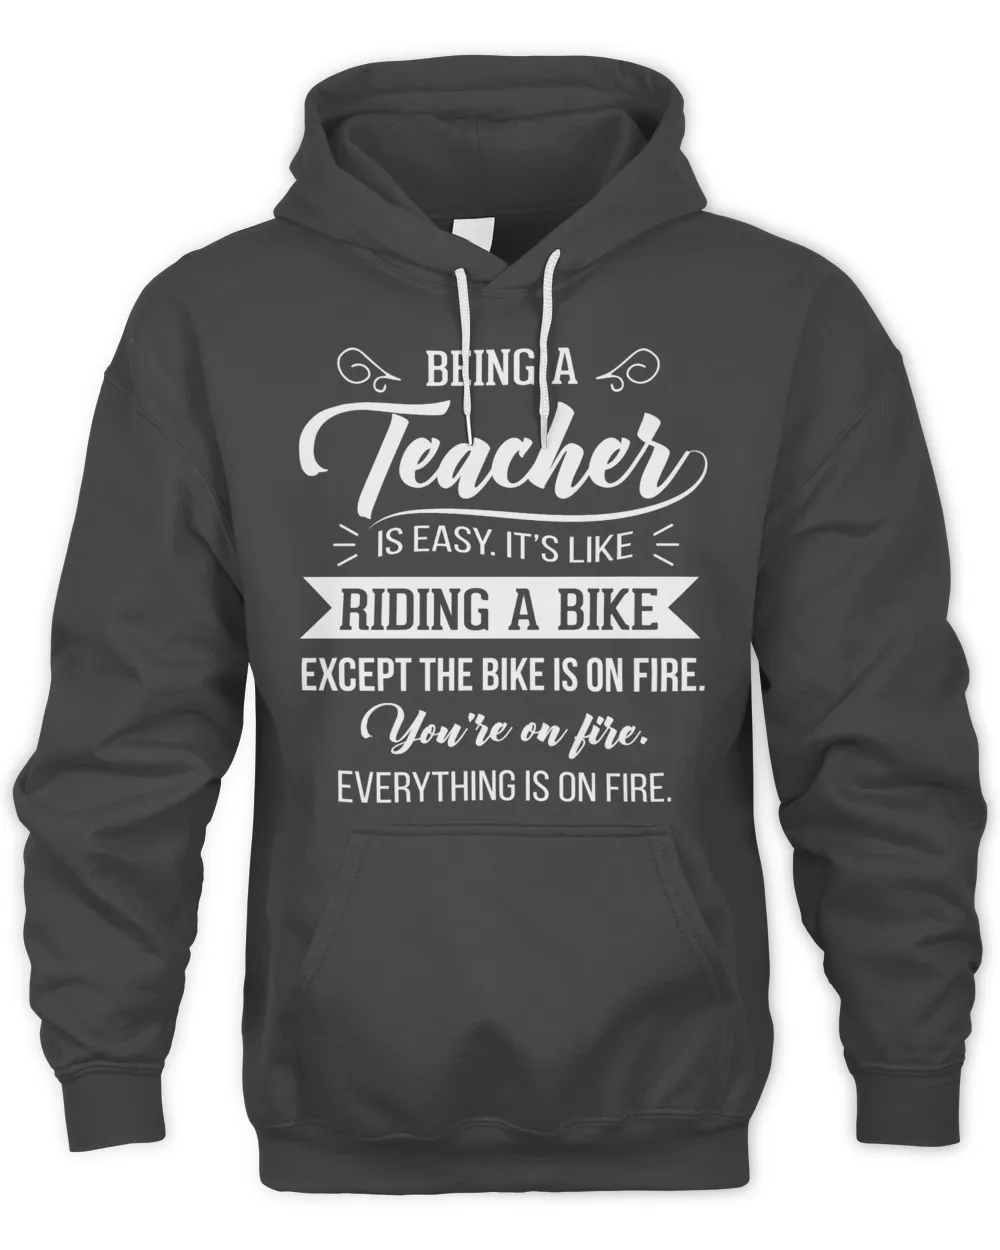 Being a teacher is easy It's like riding a bike except the bike is on fire You're on fire evething is on fire